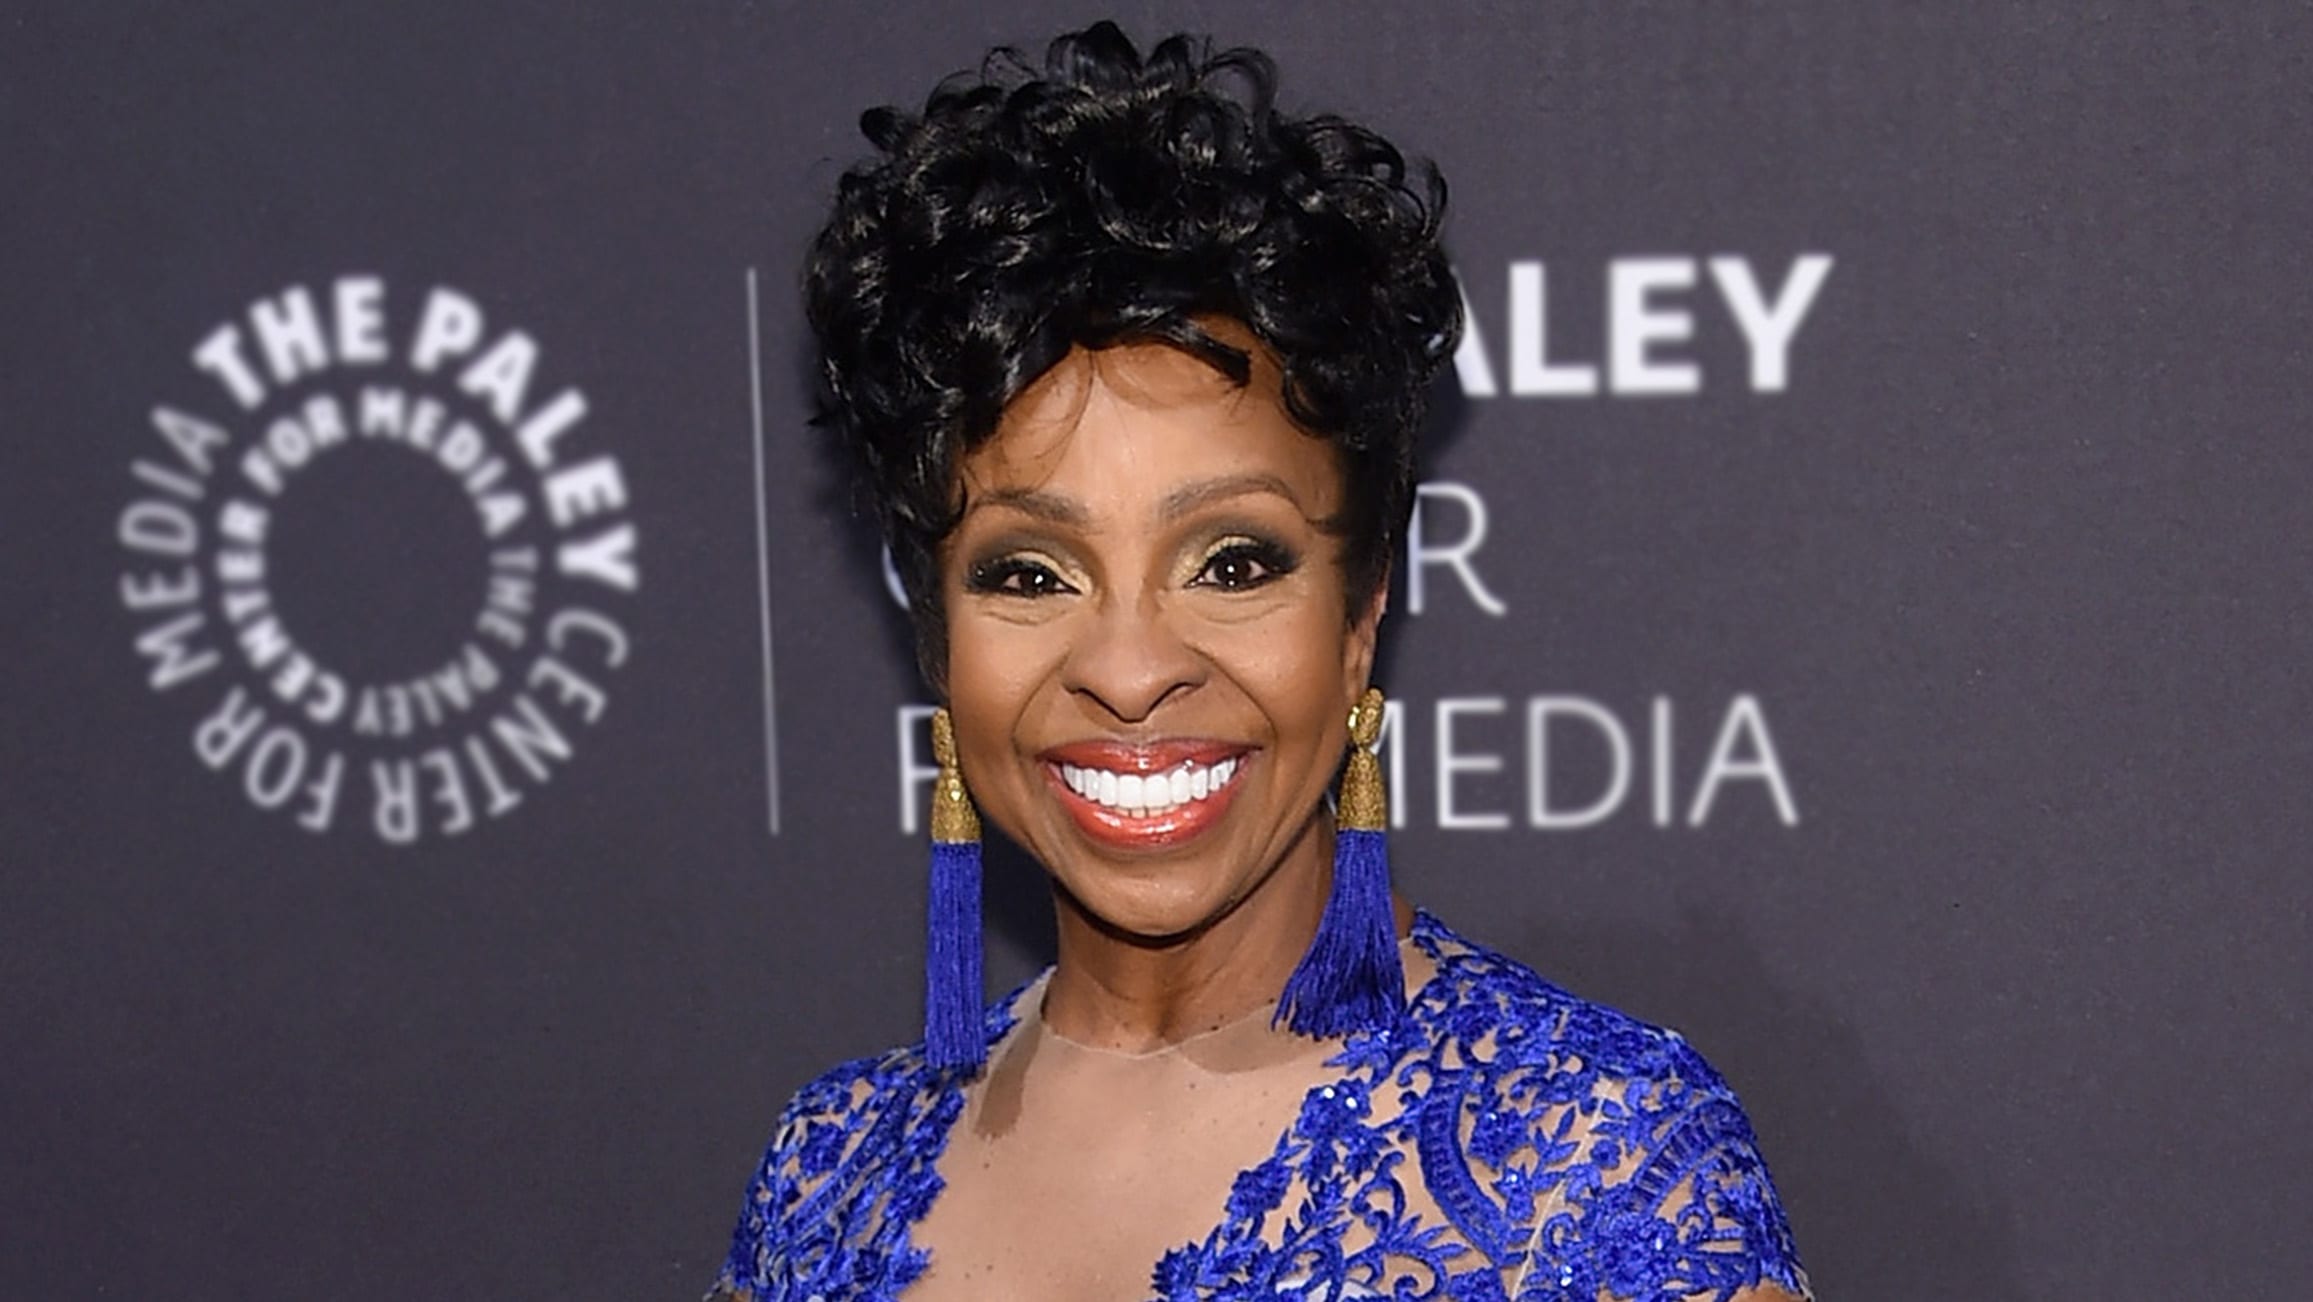 How Old Is Gladys Knight, The Singer?